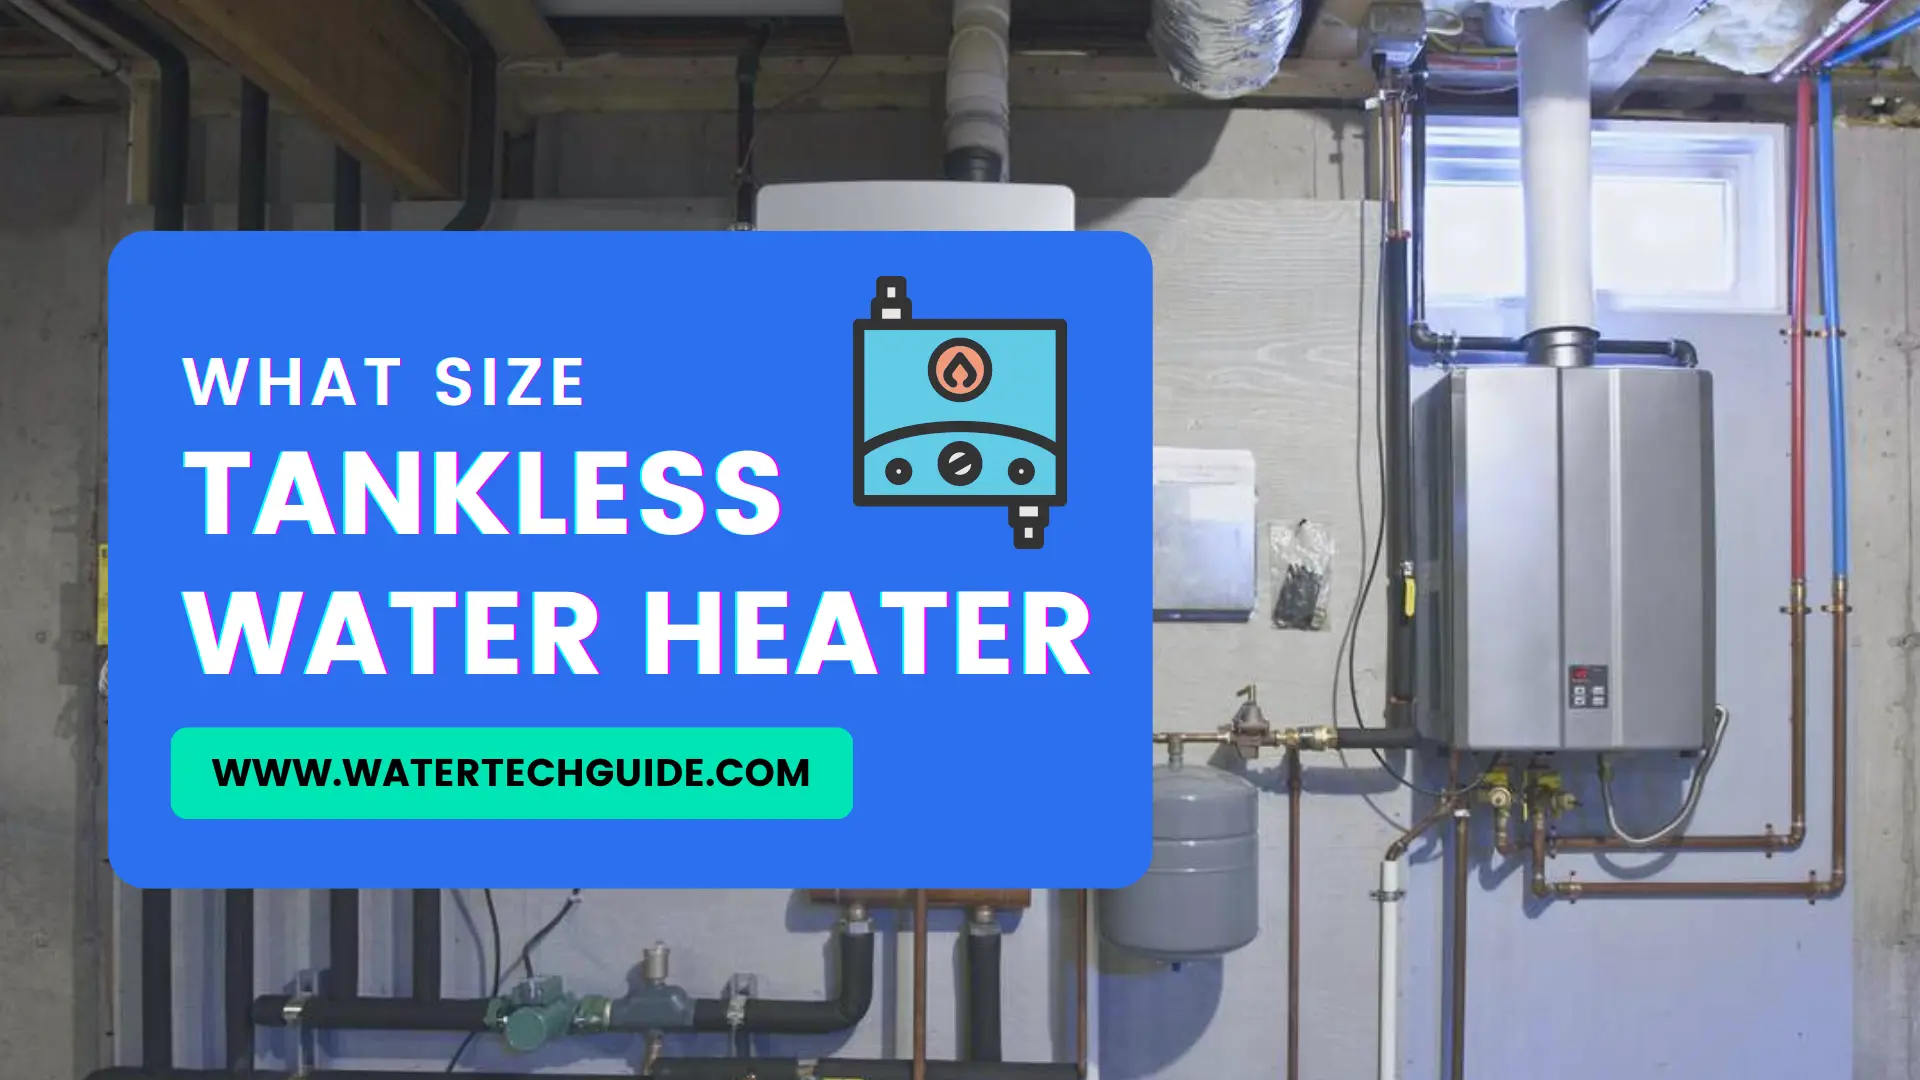 Choosing the Right Size Tankless Water Heater for Your Needs